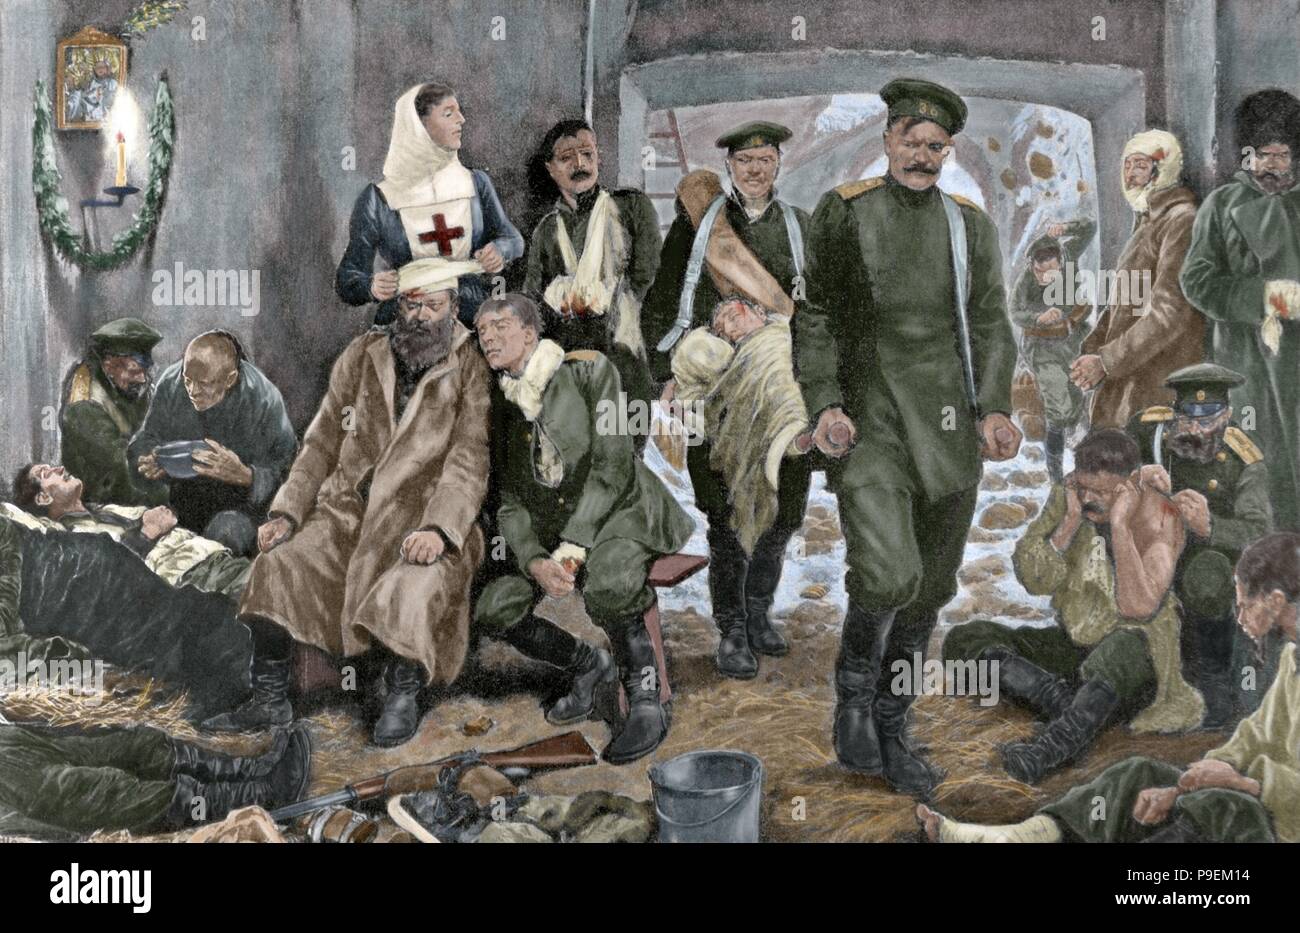 Russo-Japanese War (1904-1905). Campaign hospital of the Russian troops in Manchuria. Arrival of a wounded. Engraving by R. Caton Woodville. 'La Ilustracio n Artistica', 20th century. Colored. Stock Photo